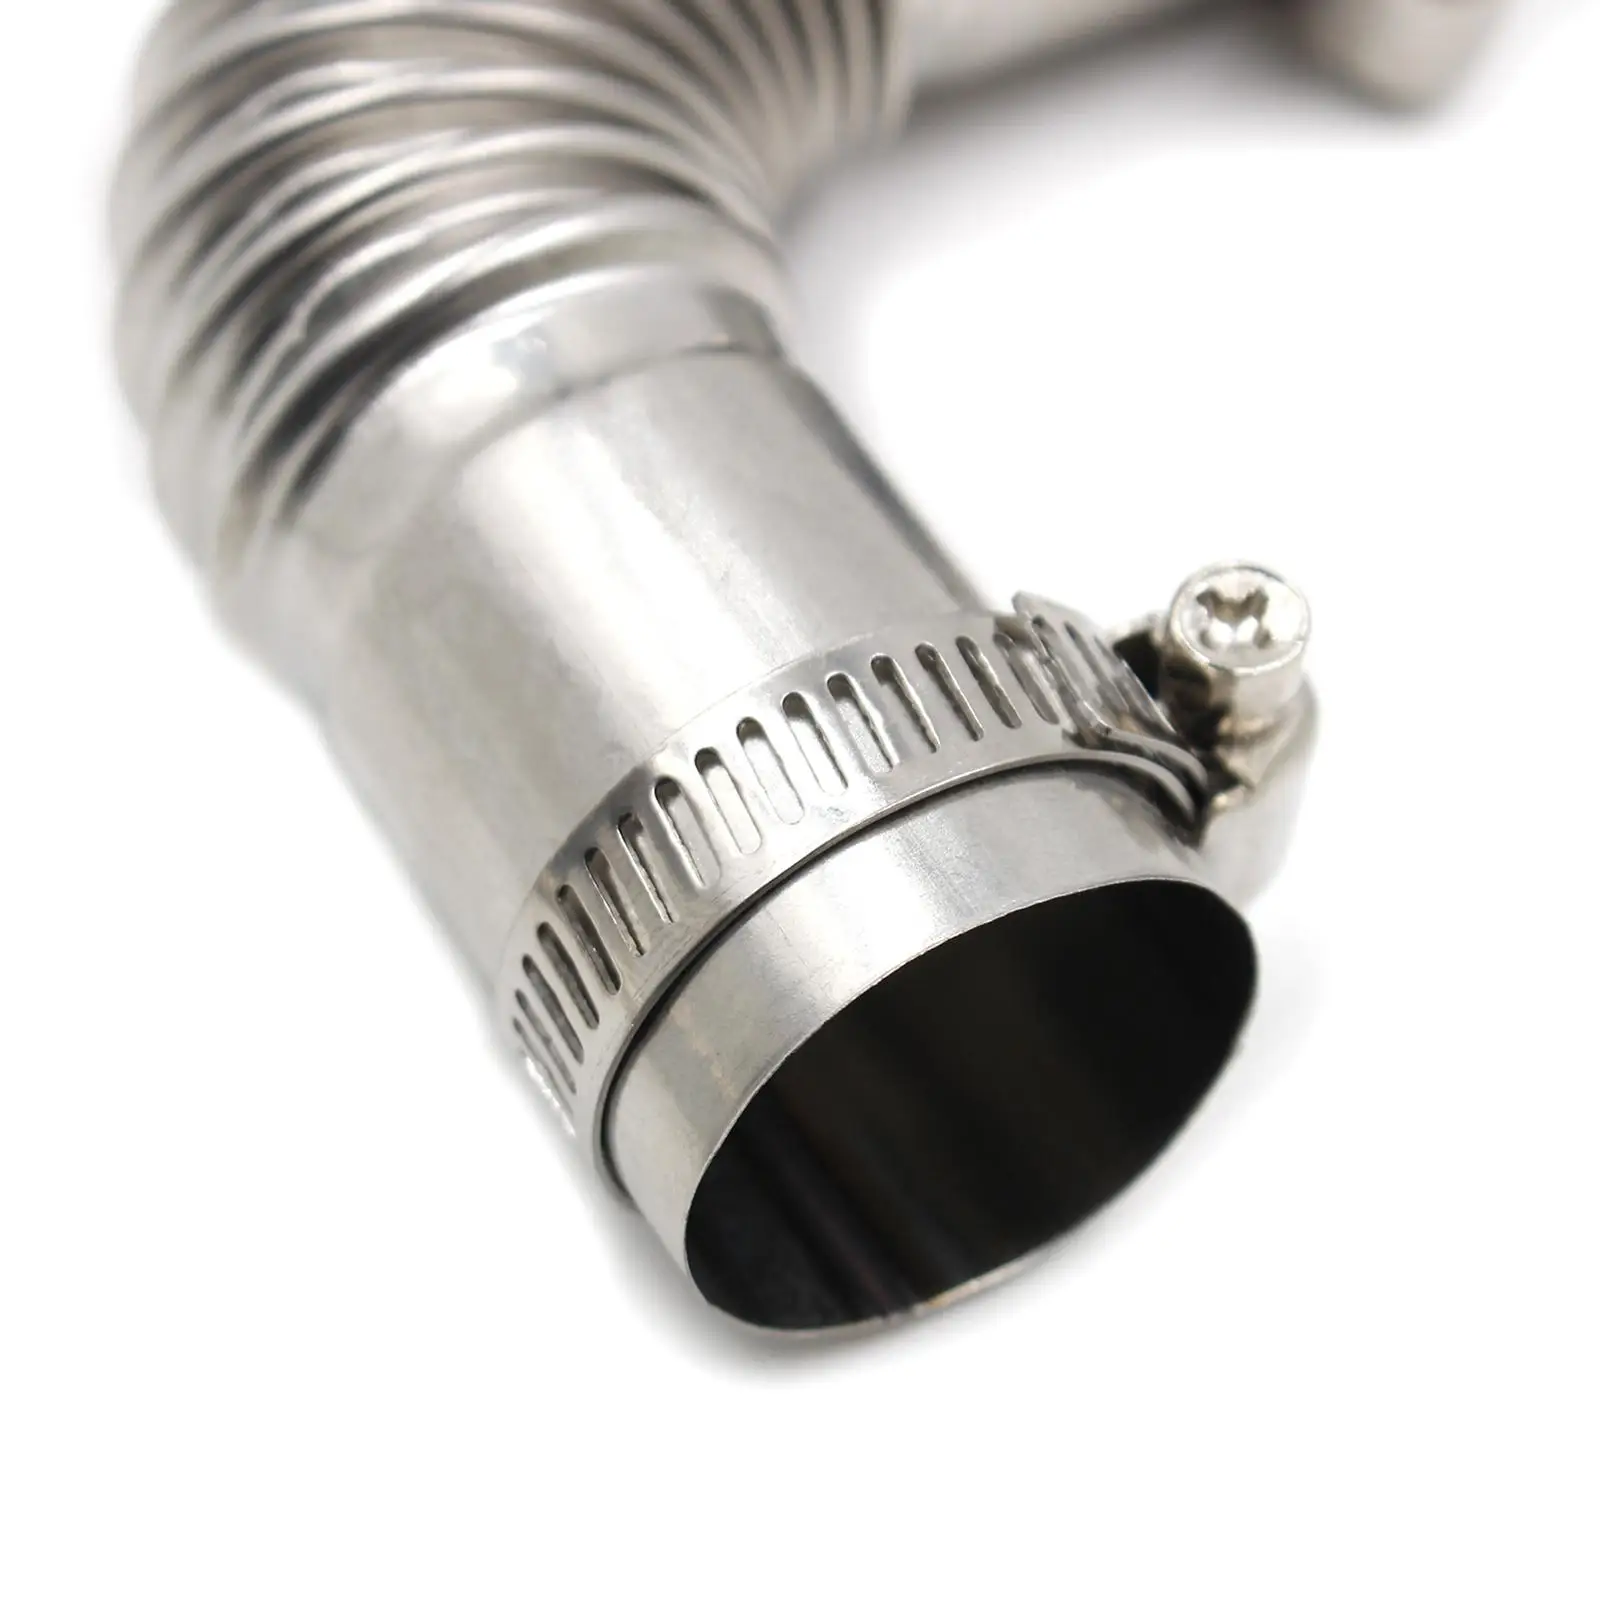 

24mm Exhaust Pipe Tube Elbow Connector 25mm ID Stainless Steel Air Exhaust Pipes Connector for Heater W/ Clamps